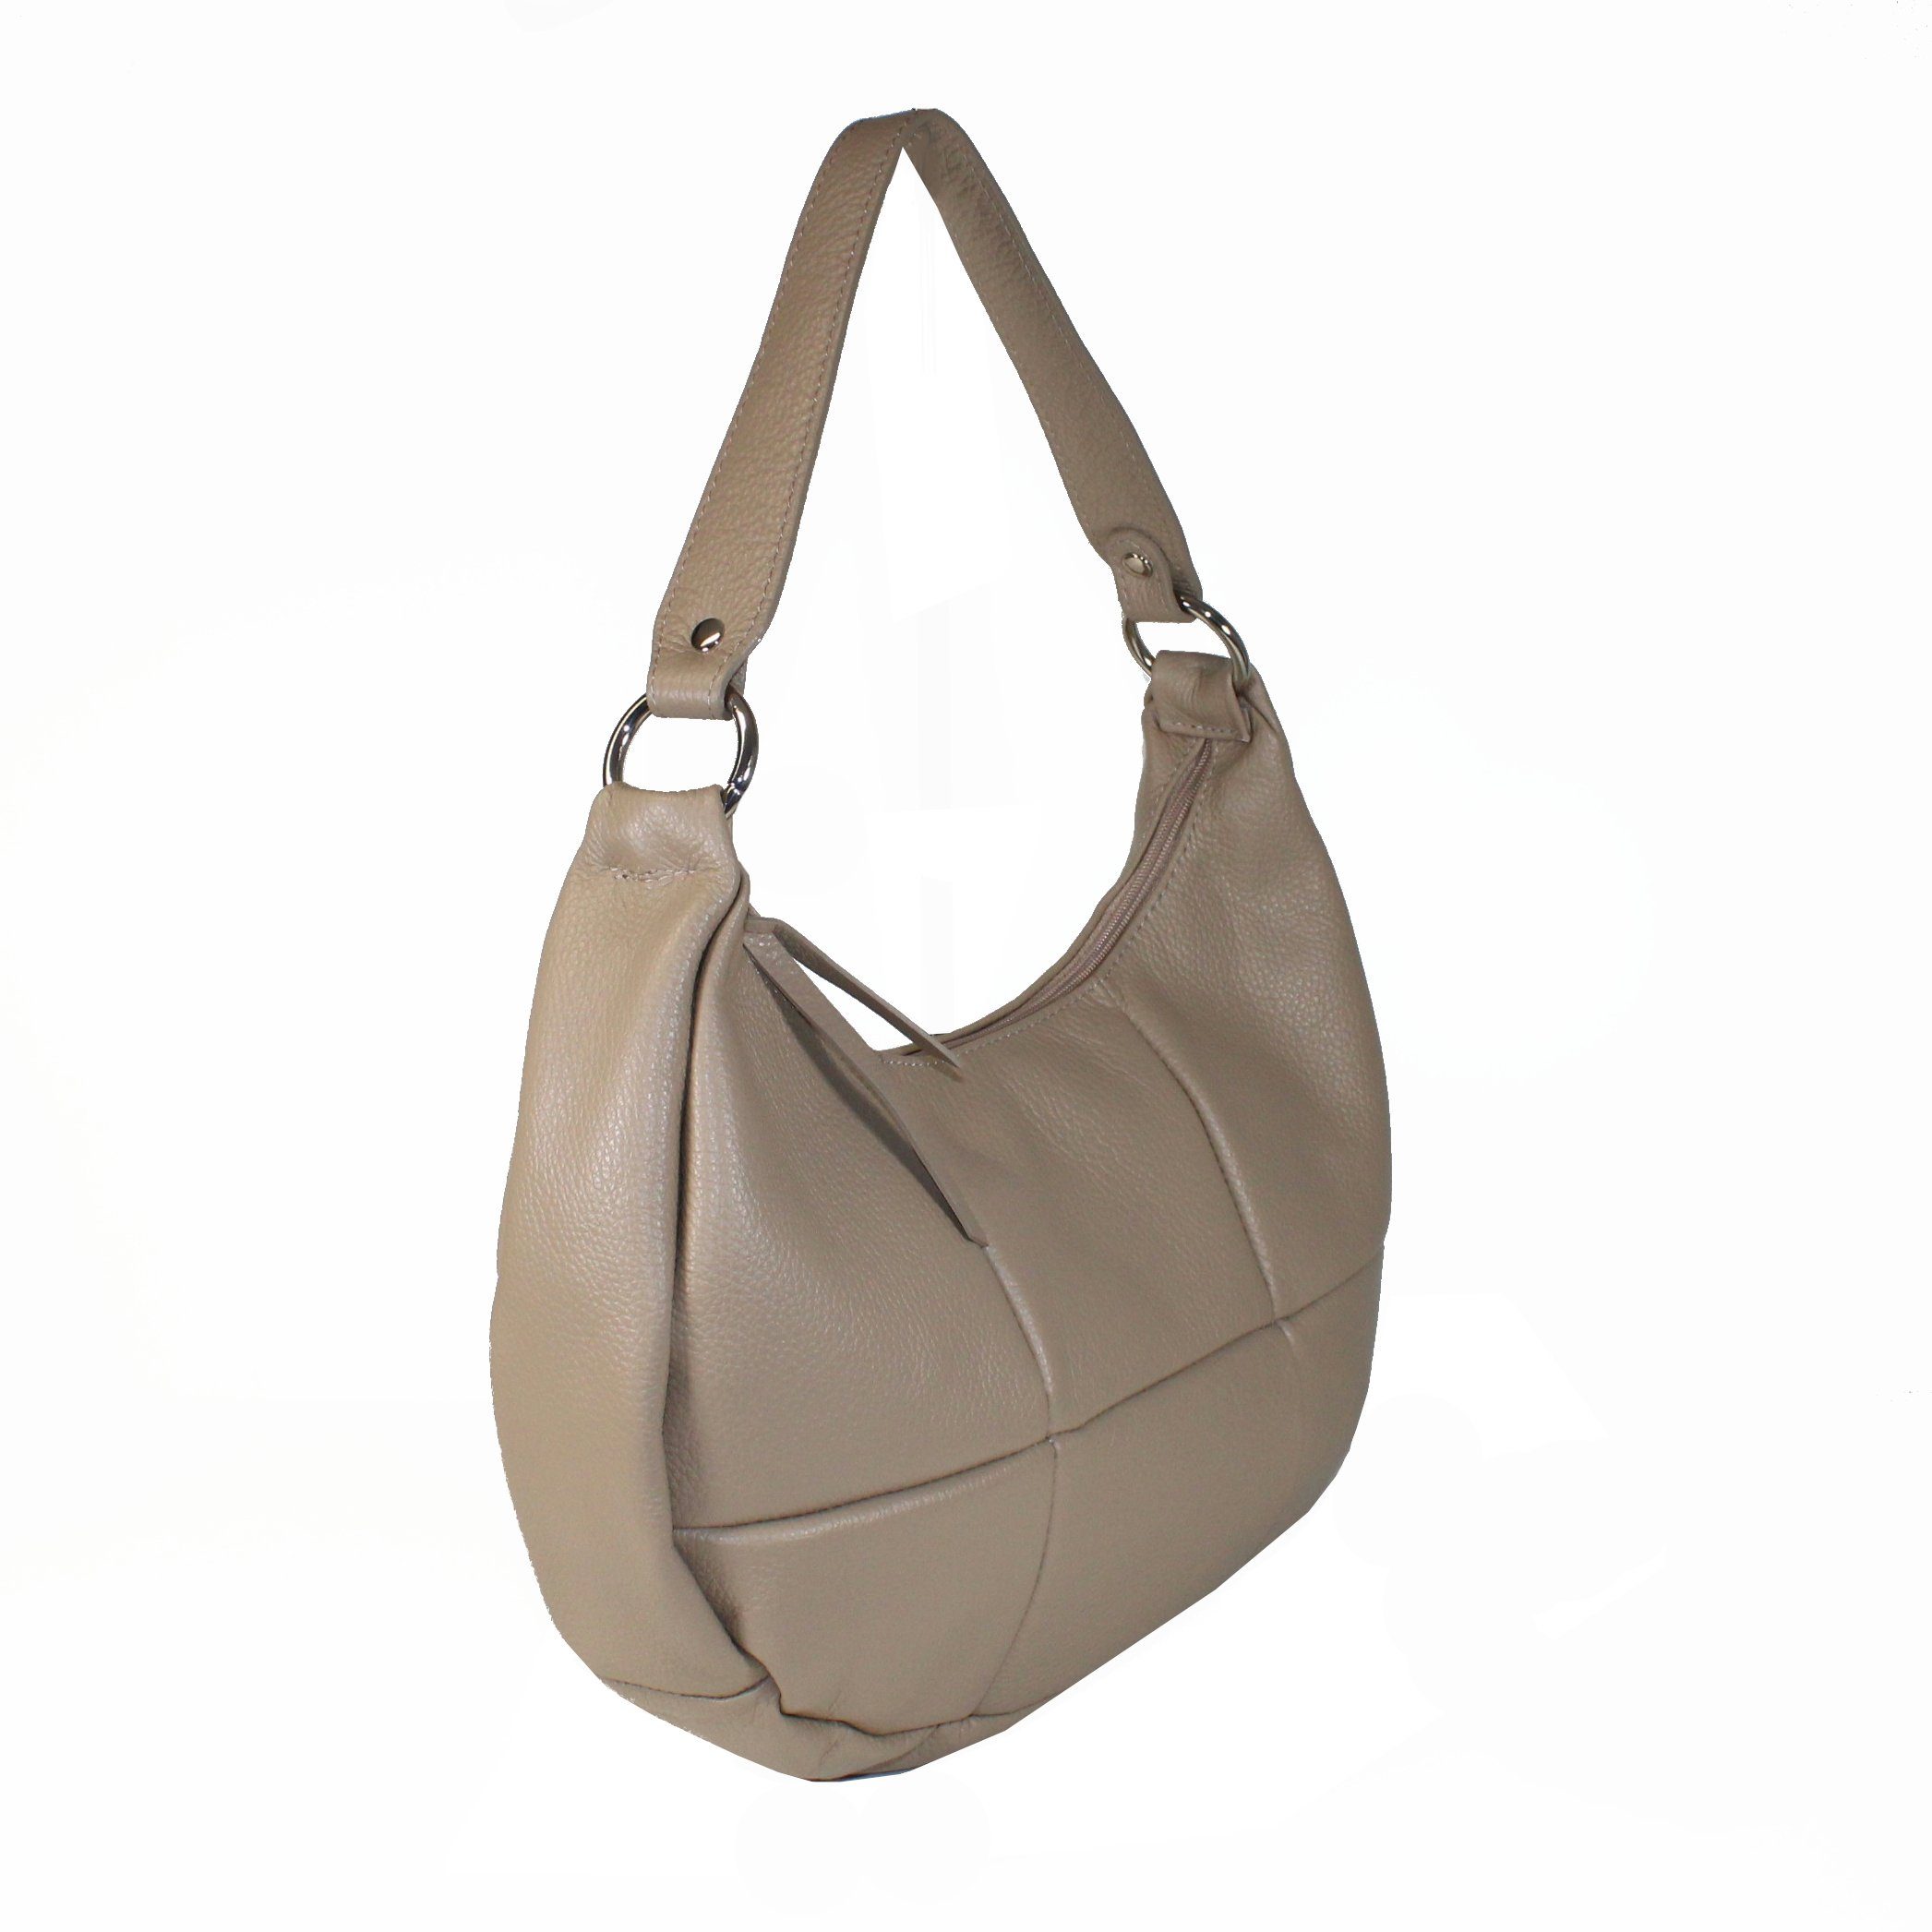 in Handtasche Made Taupe fs7219, Italy Optik, fs-bags Patchwork